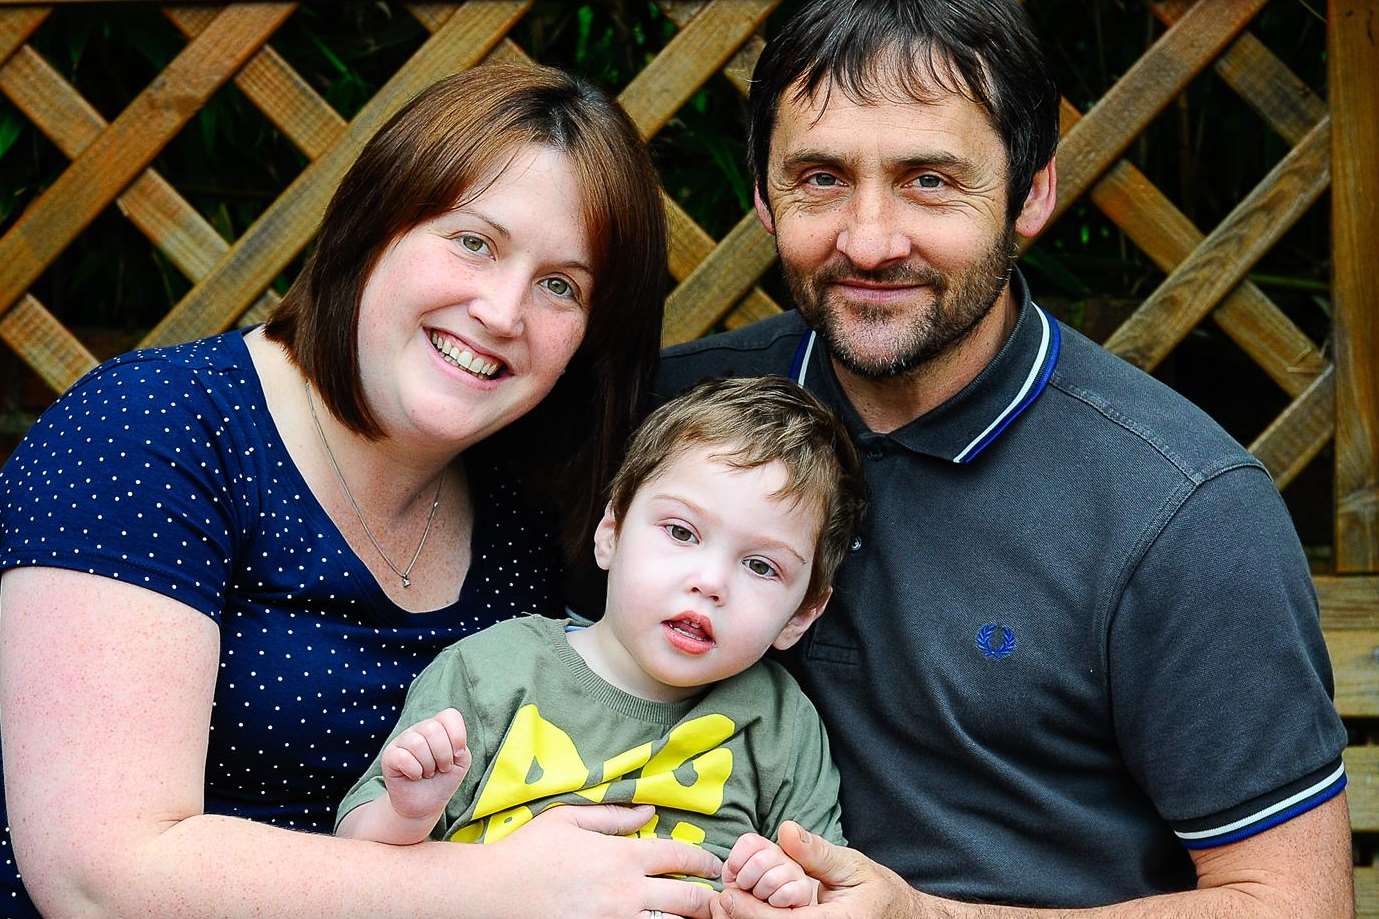 Debbie Chapman, David Page and their son Archie